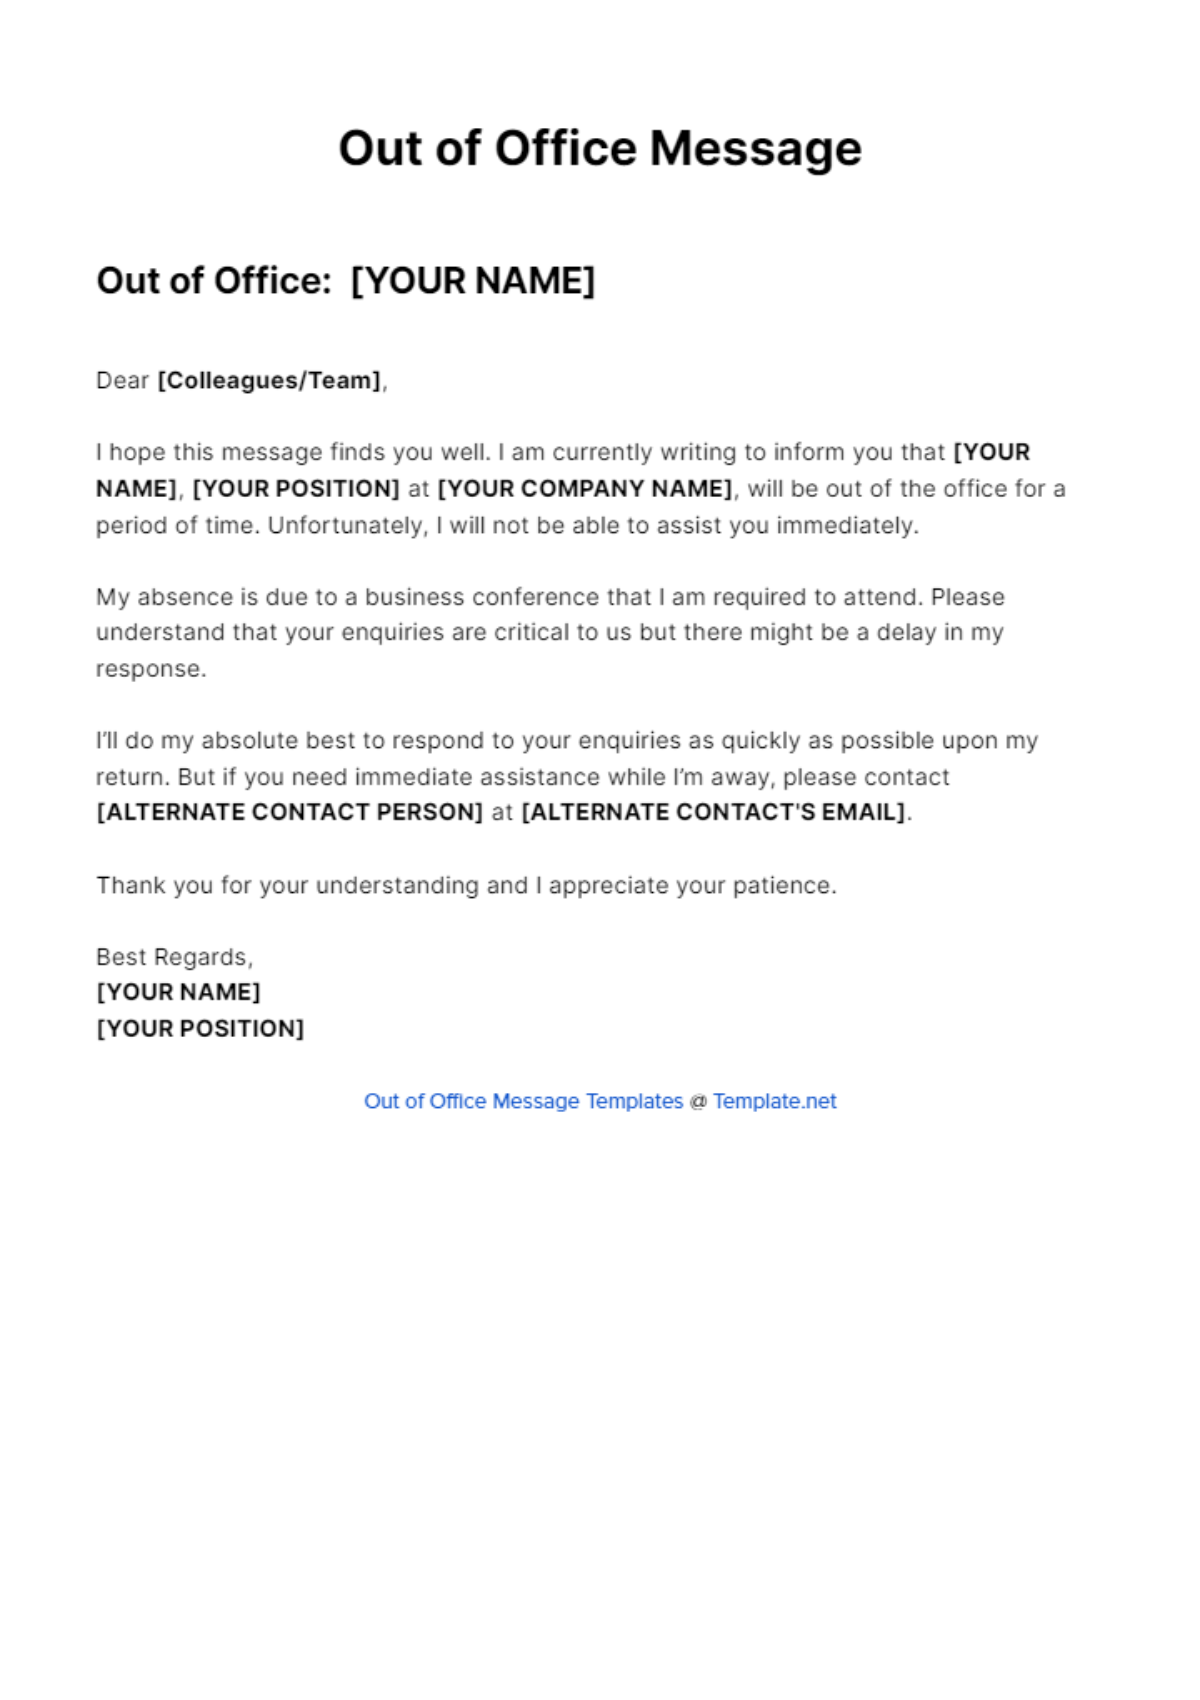 Conference Or Work Event Out Of Office Message Template